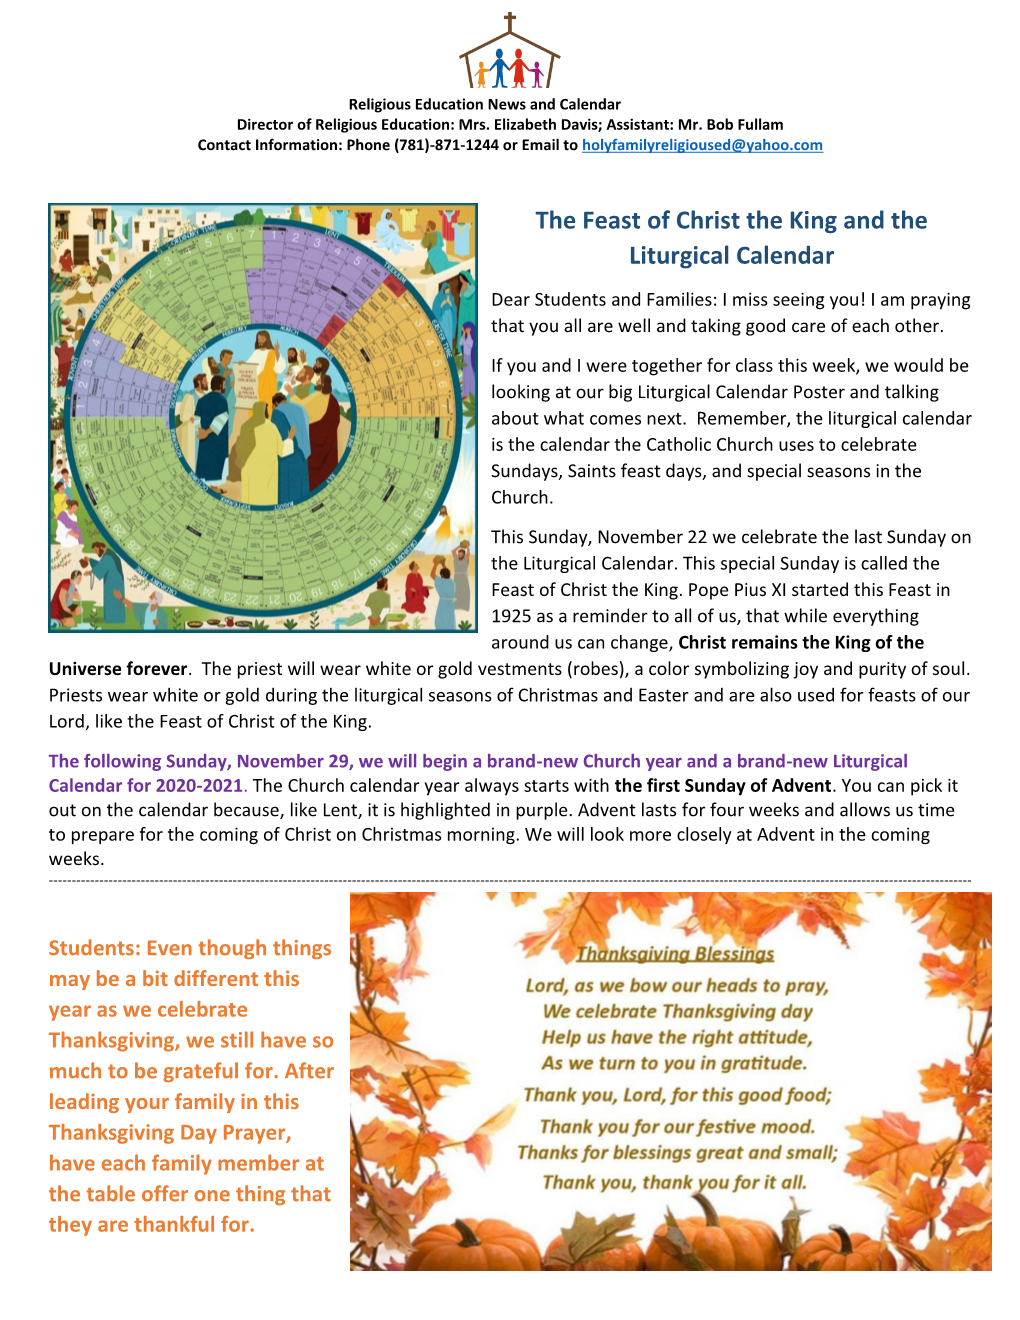 The Feast of Christ the King and the Liturgical Calendar DocsLib